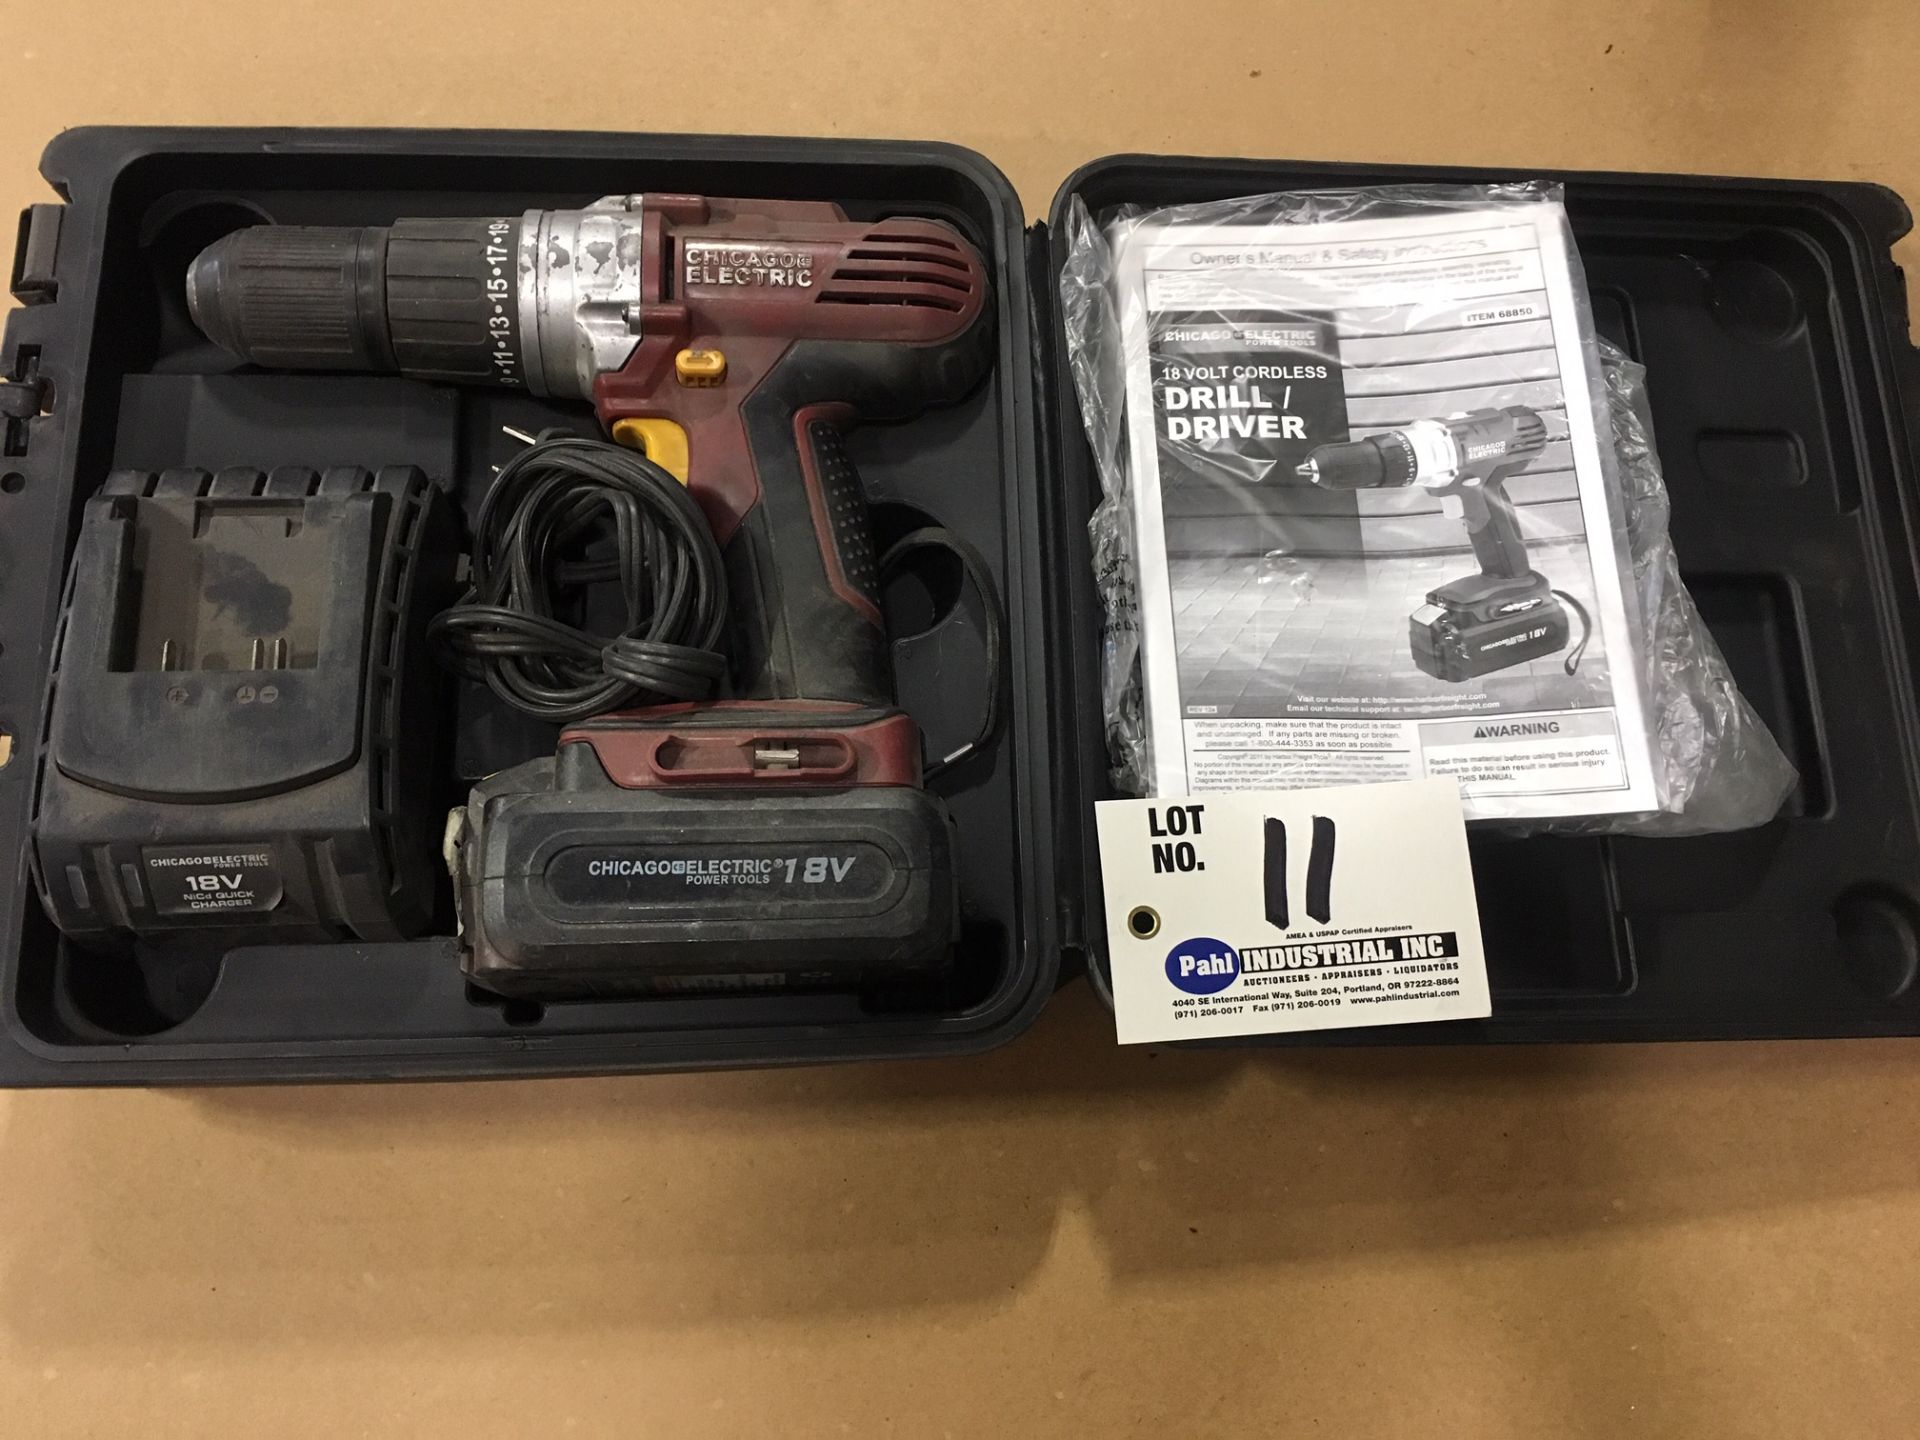 Chicago 18V battery powered drill c/w battery and charger